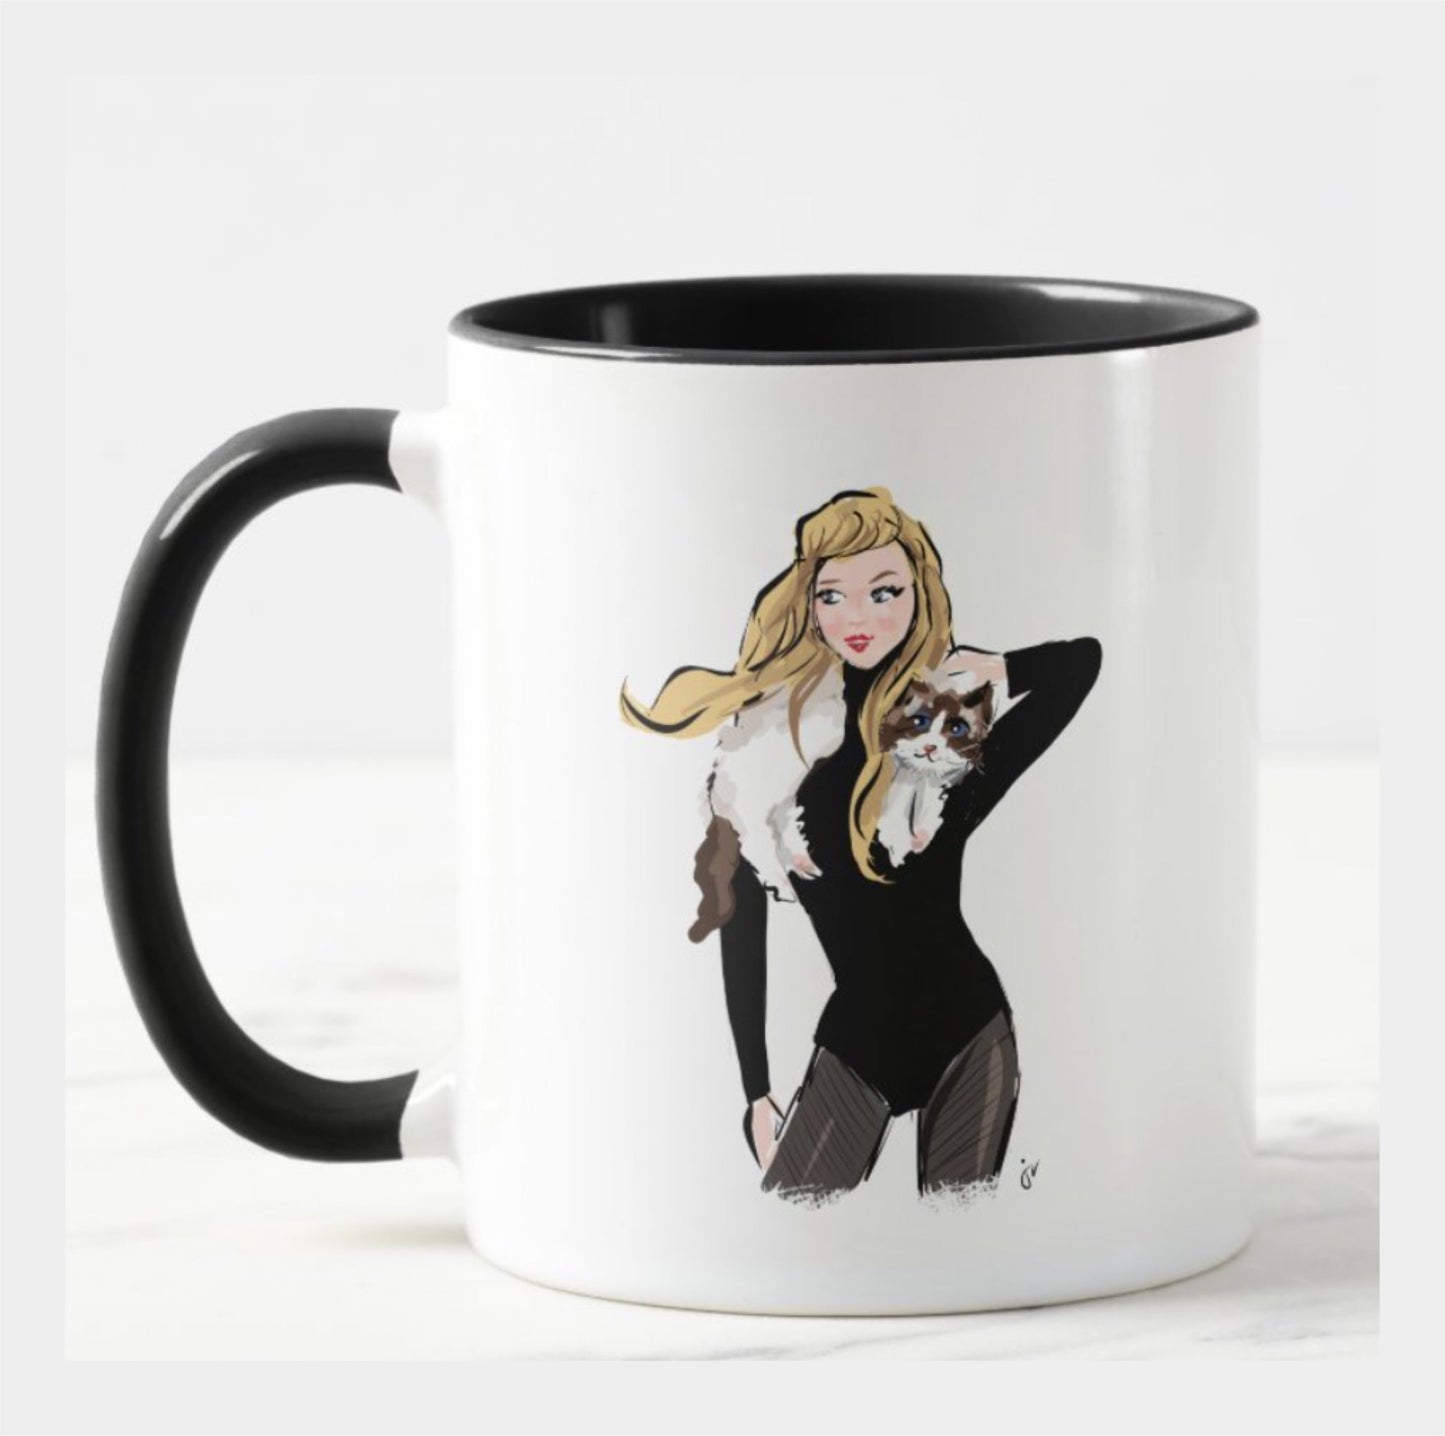 Taylor Swift Time Person of the Year Mug (15 oz)